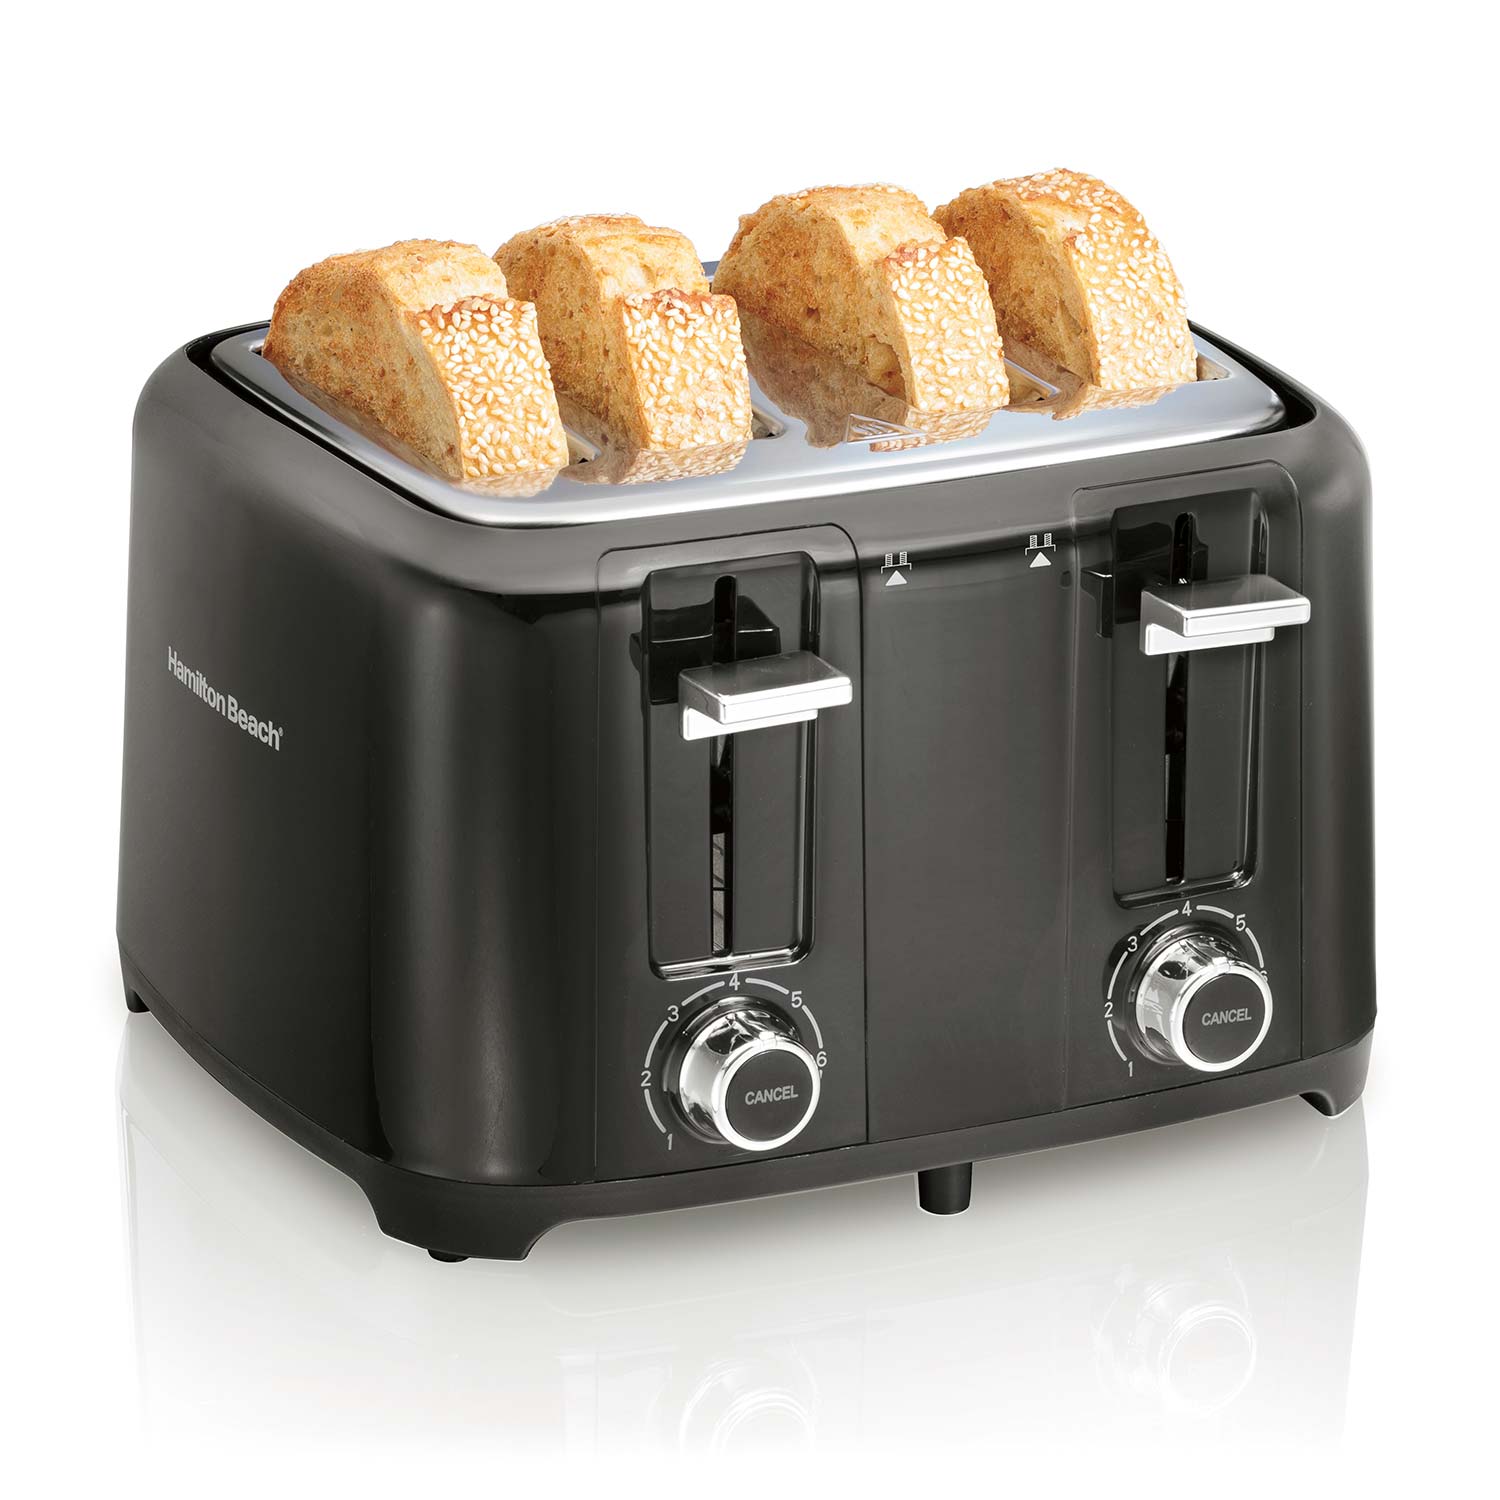 4 Slice Toaster with Extra-Wide Slots (24217G)